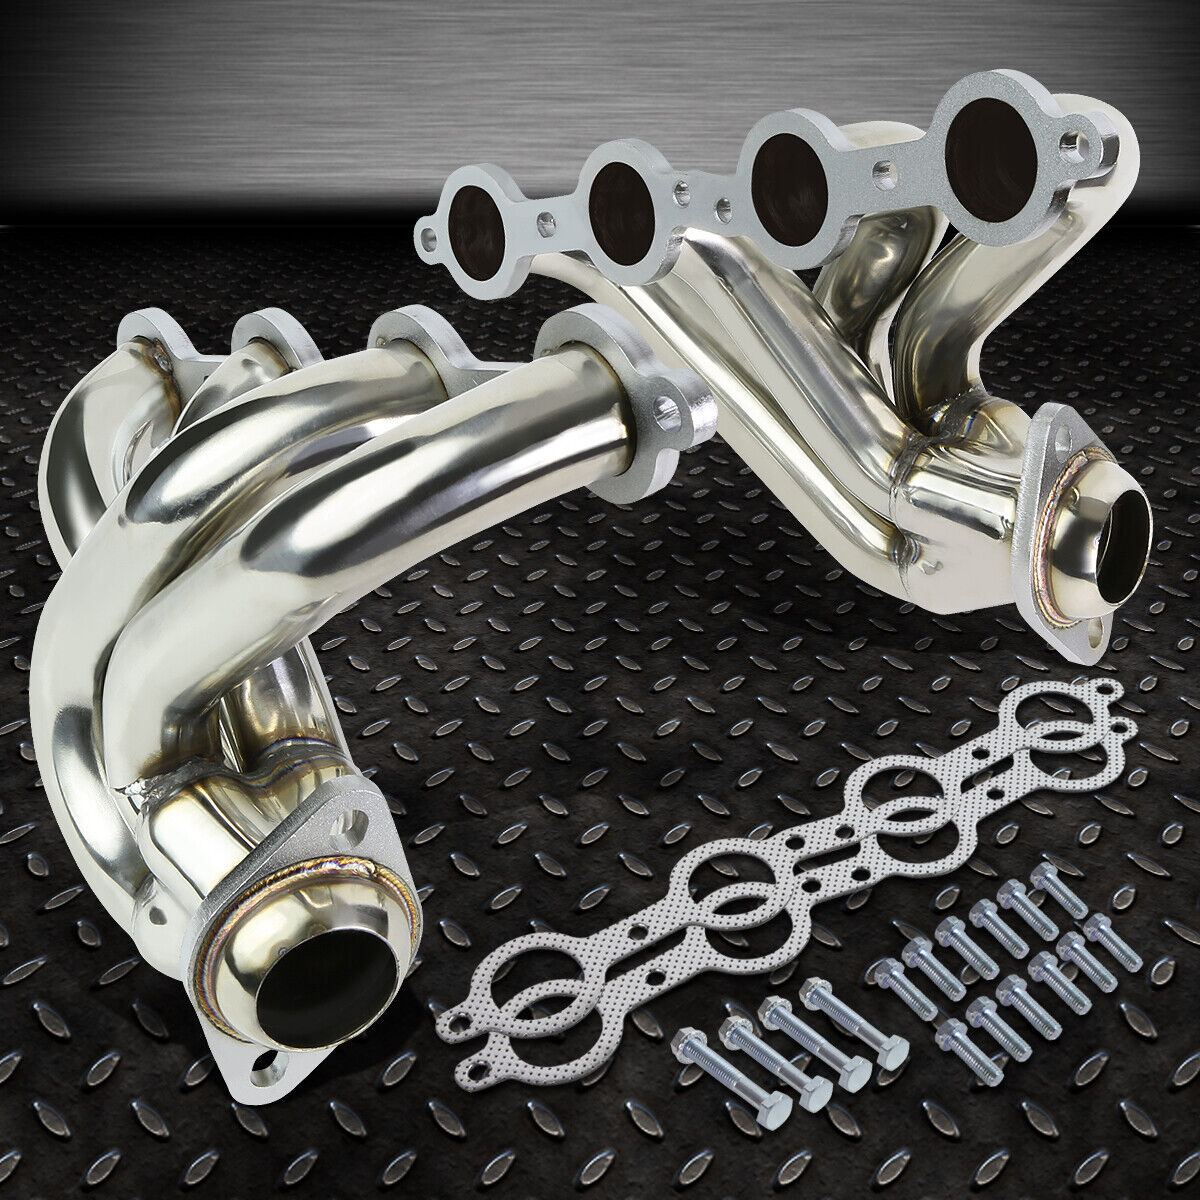 FOR 04-06 PONTIAC GTO 5.7/6.0 V8 STAINLESS STEEL RACING HEADER EXHAUST MANIFOLD